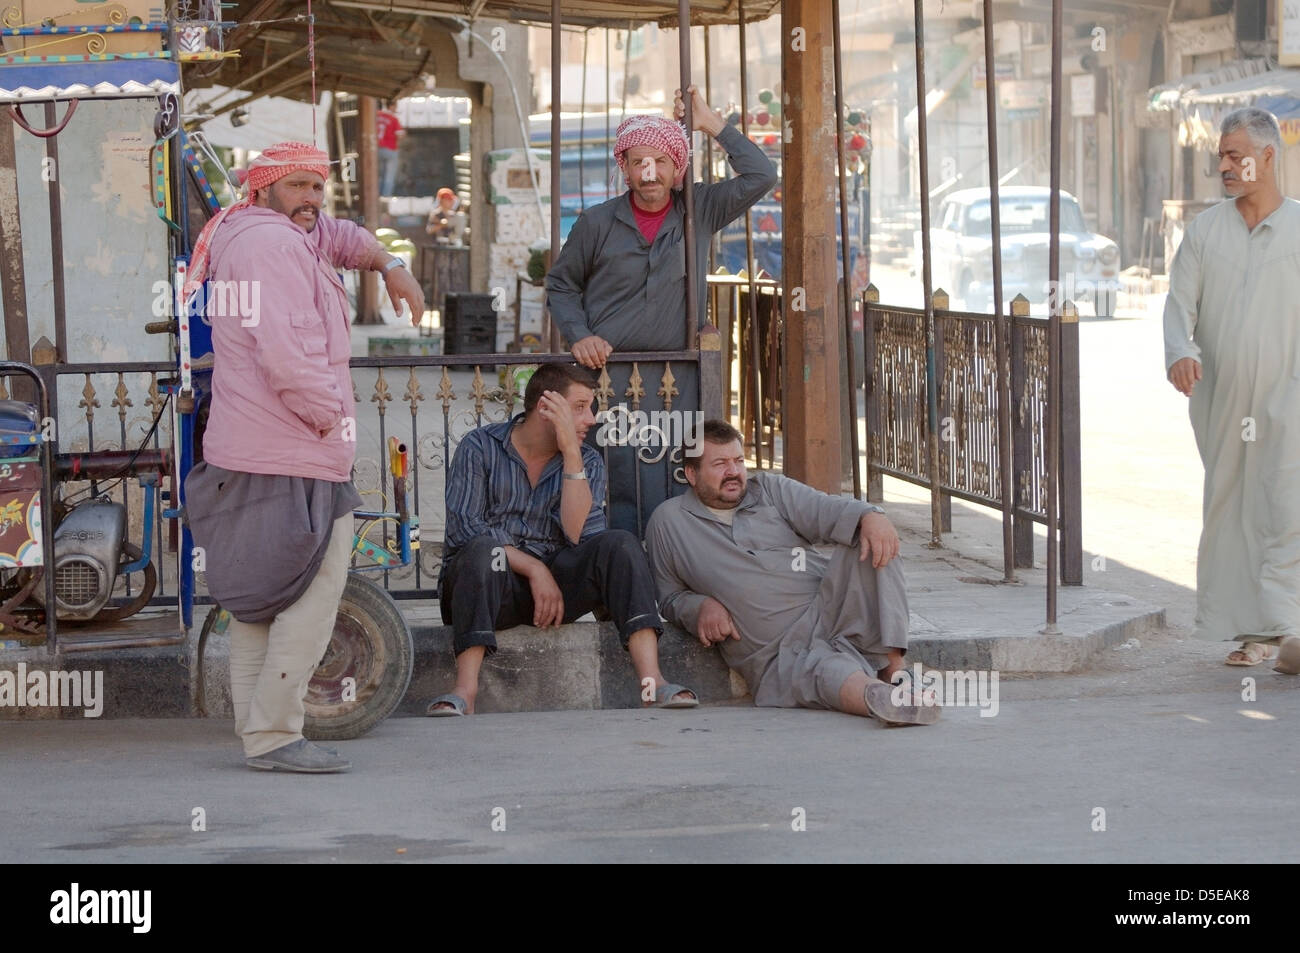 Misters talking in a roadside cafe, Palmyra, Syria  Stock Photo